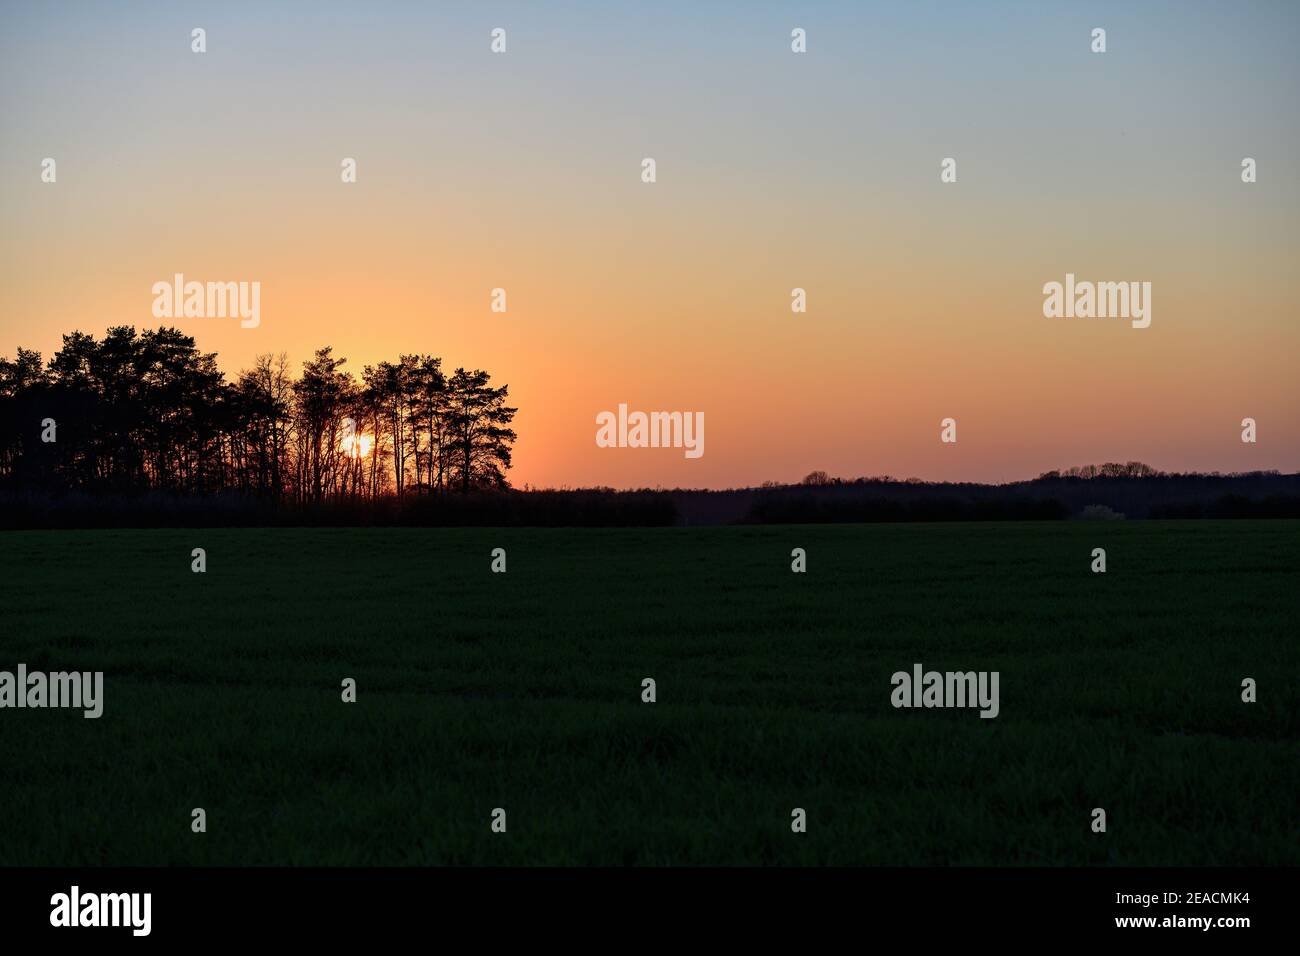 Sunset behind trees over a field Stock Photo